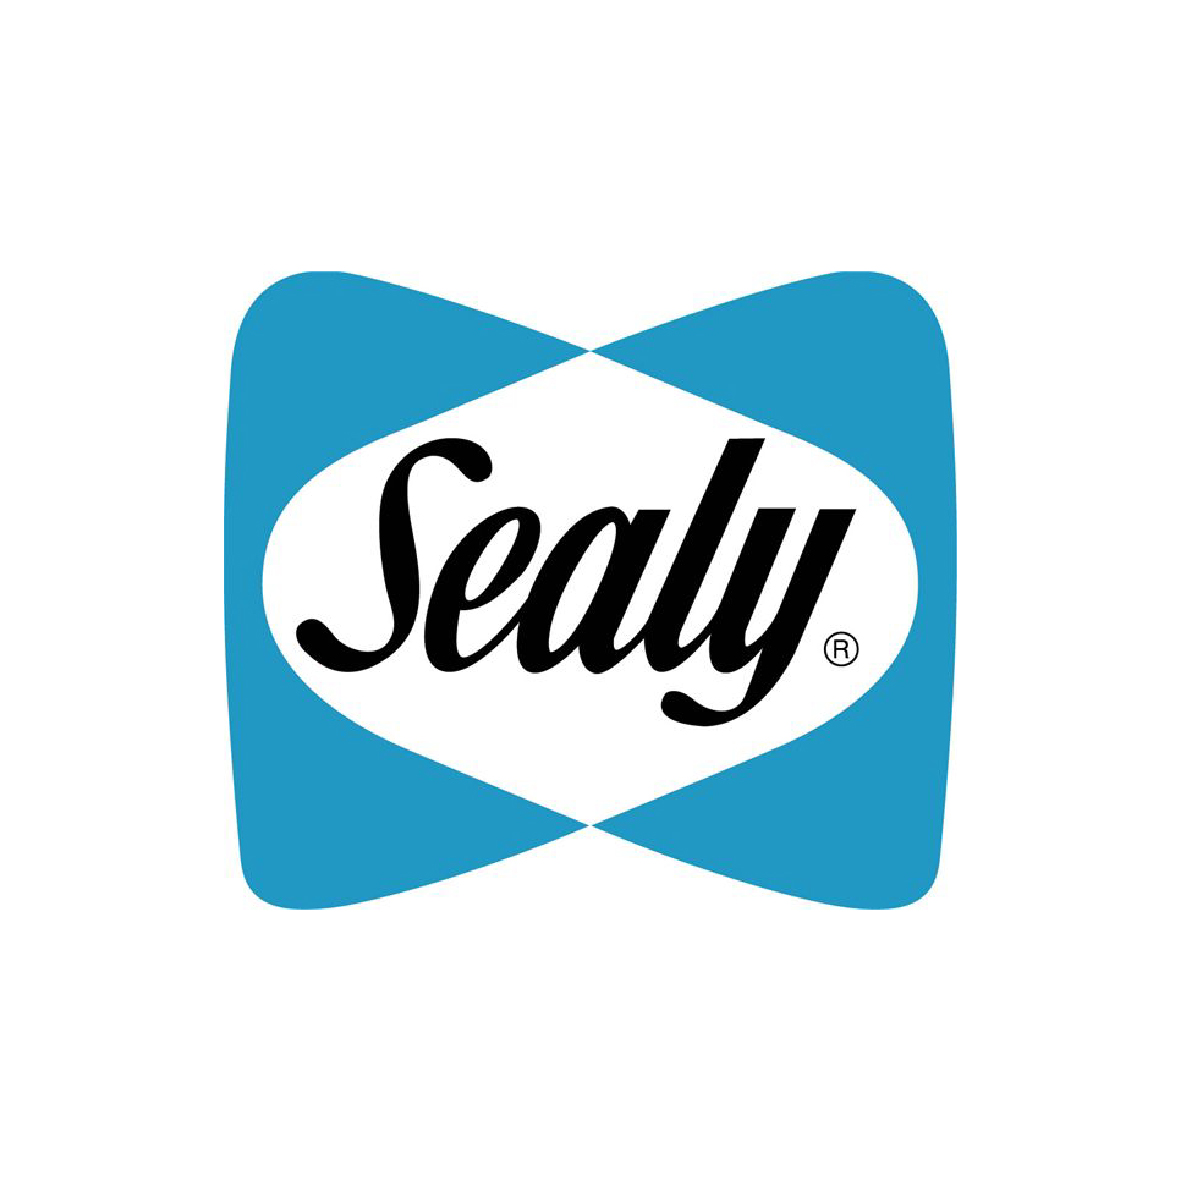 sealy-01